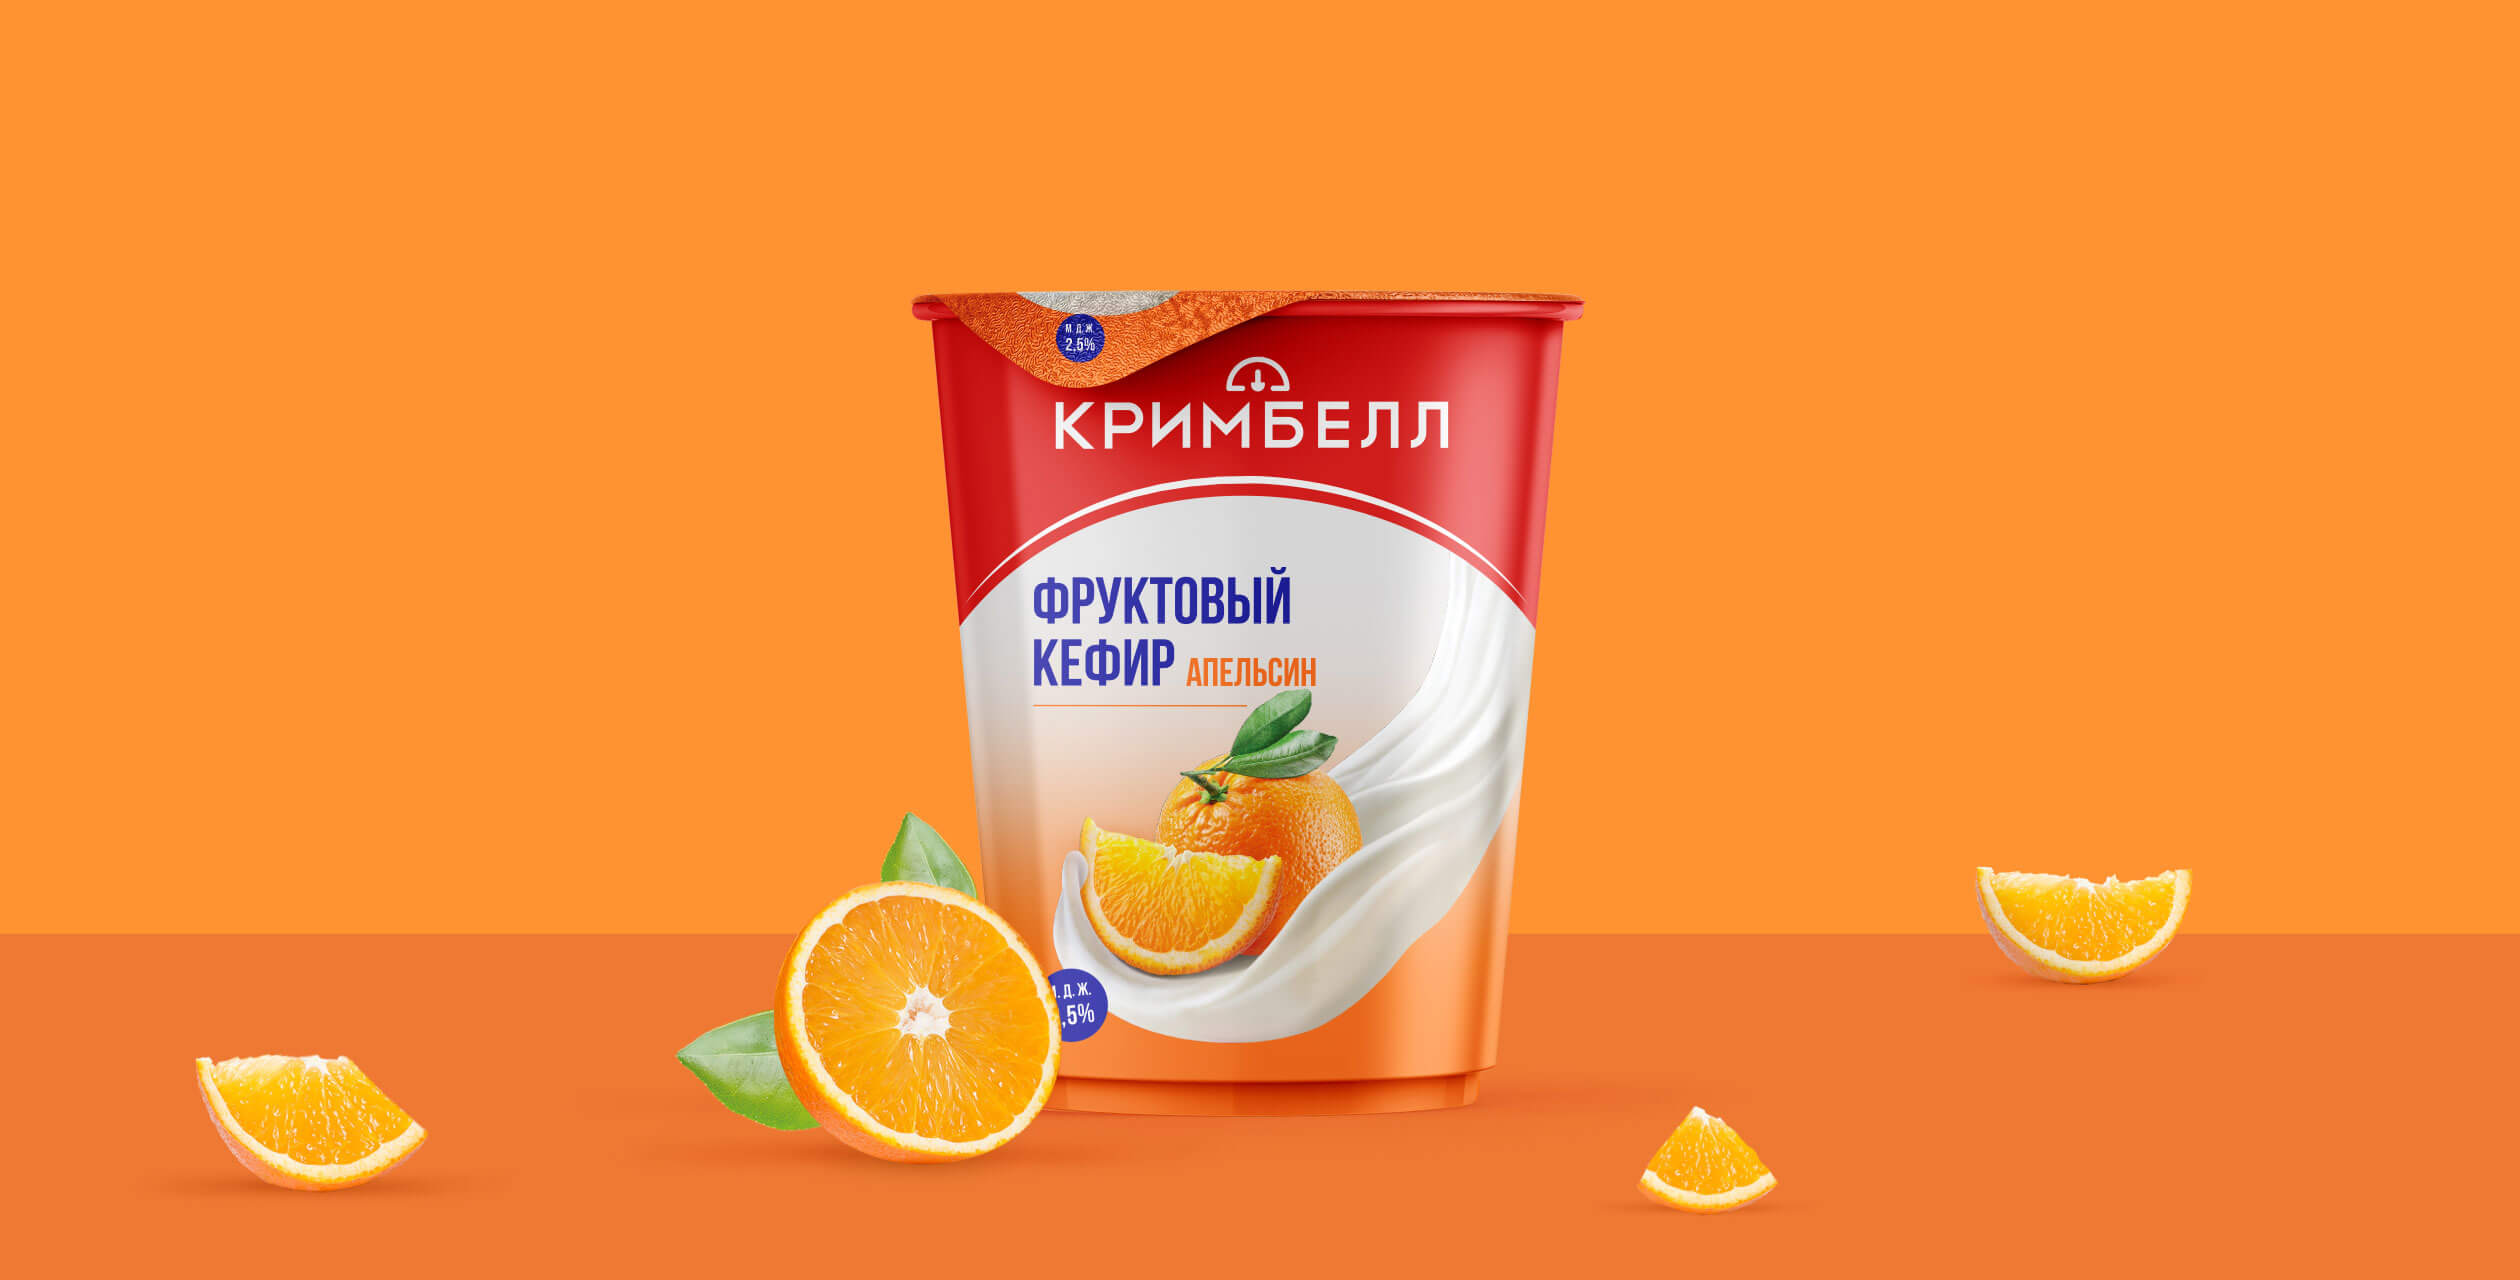 8.-Creambell-Russia-Dairy